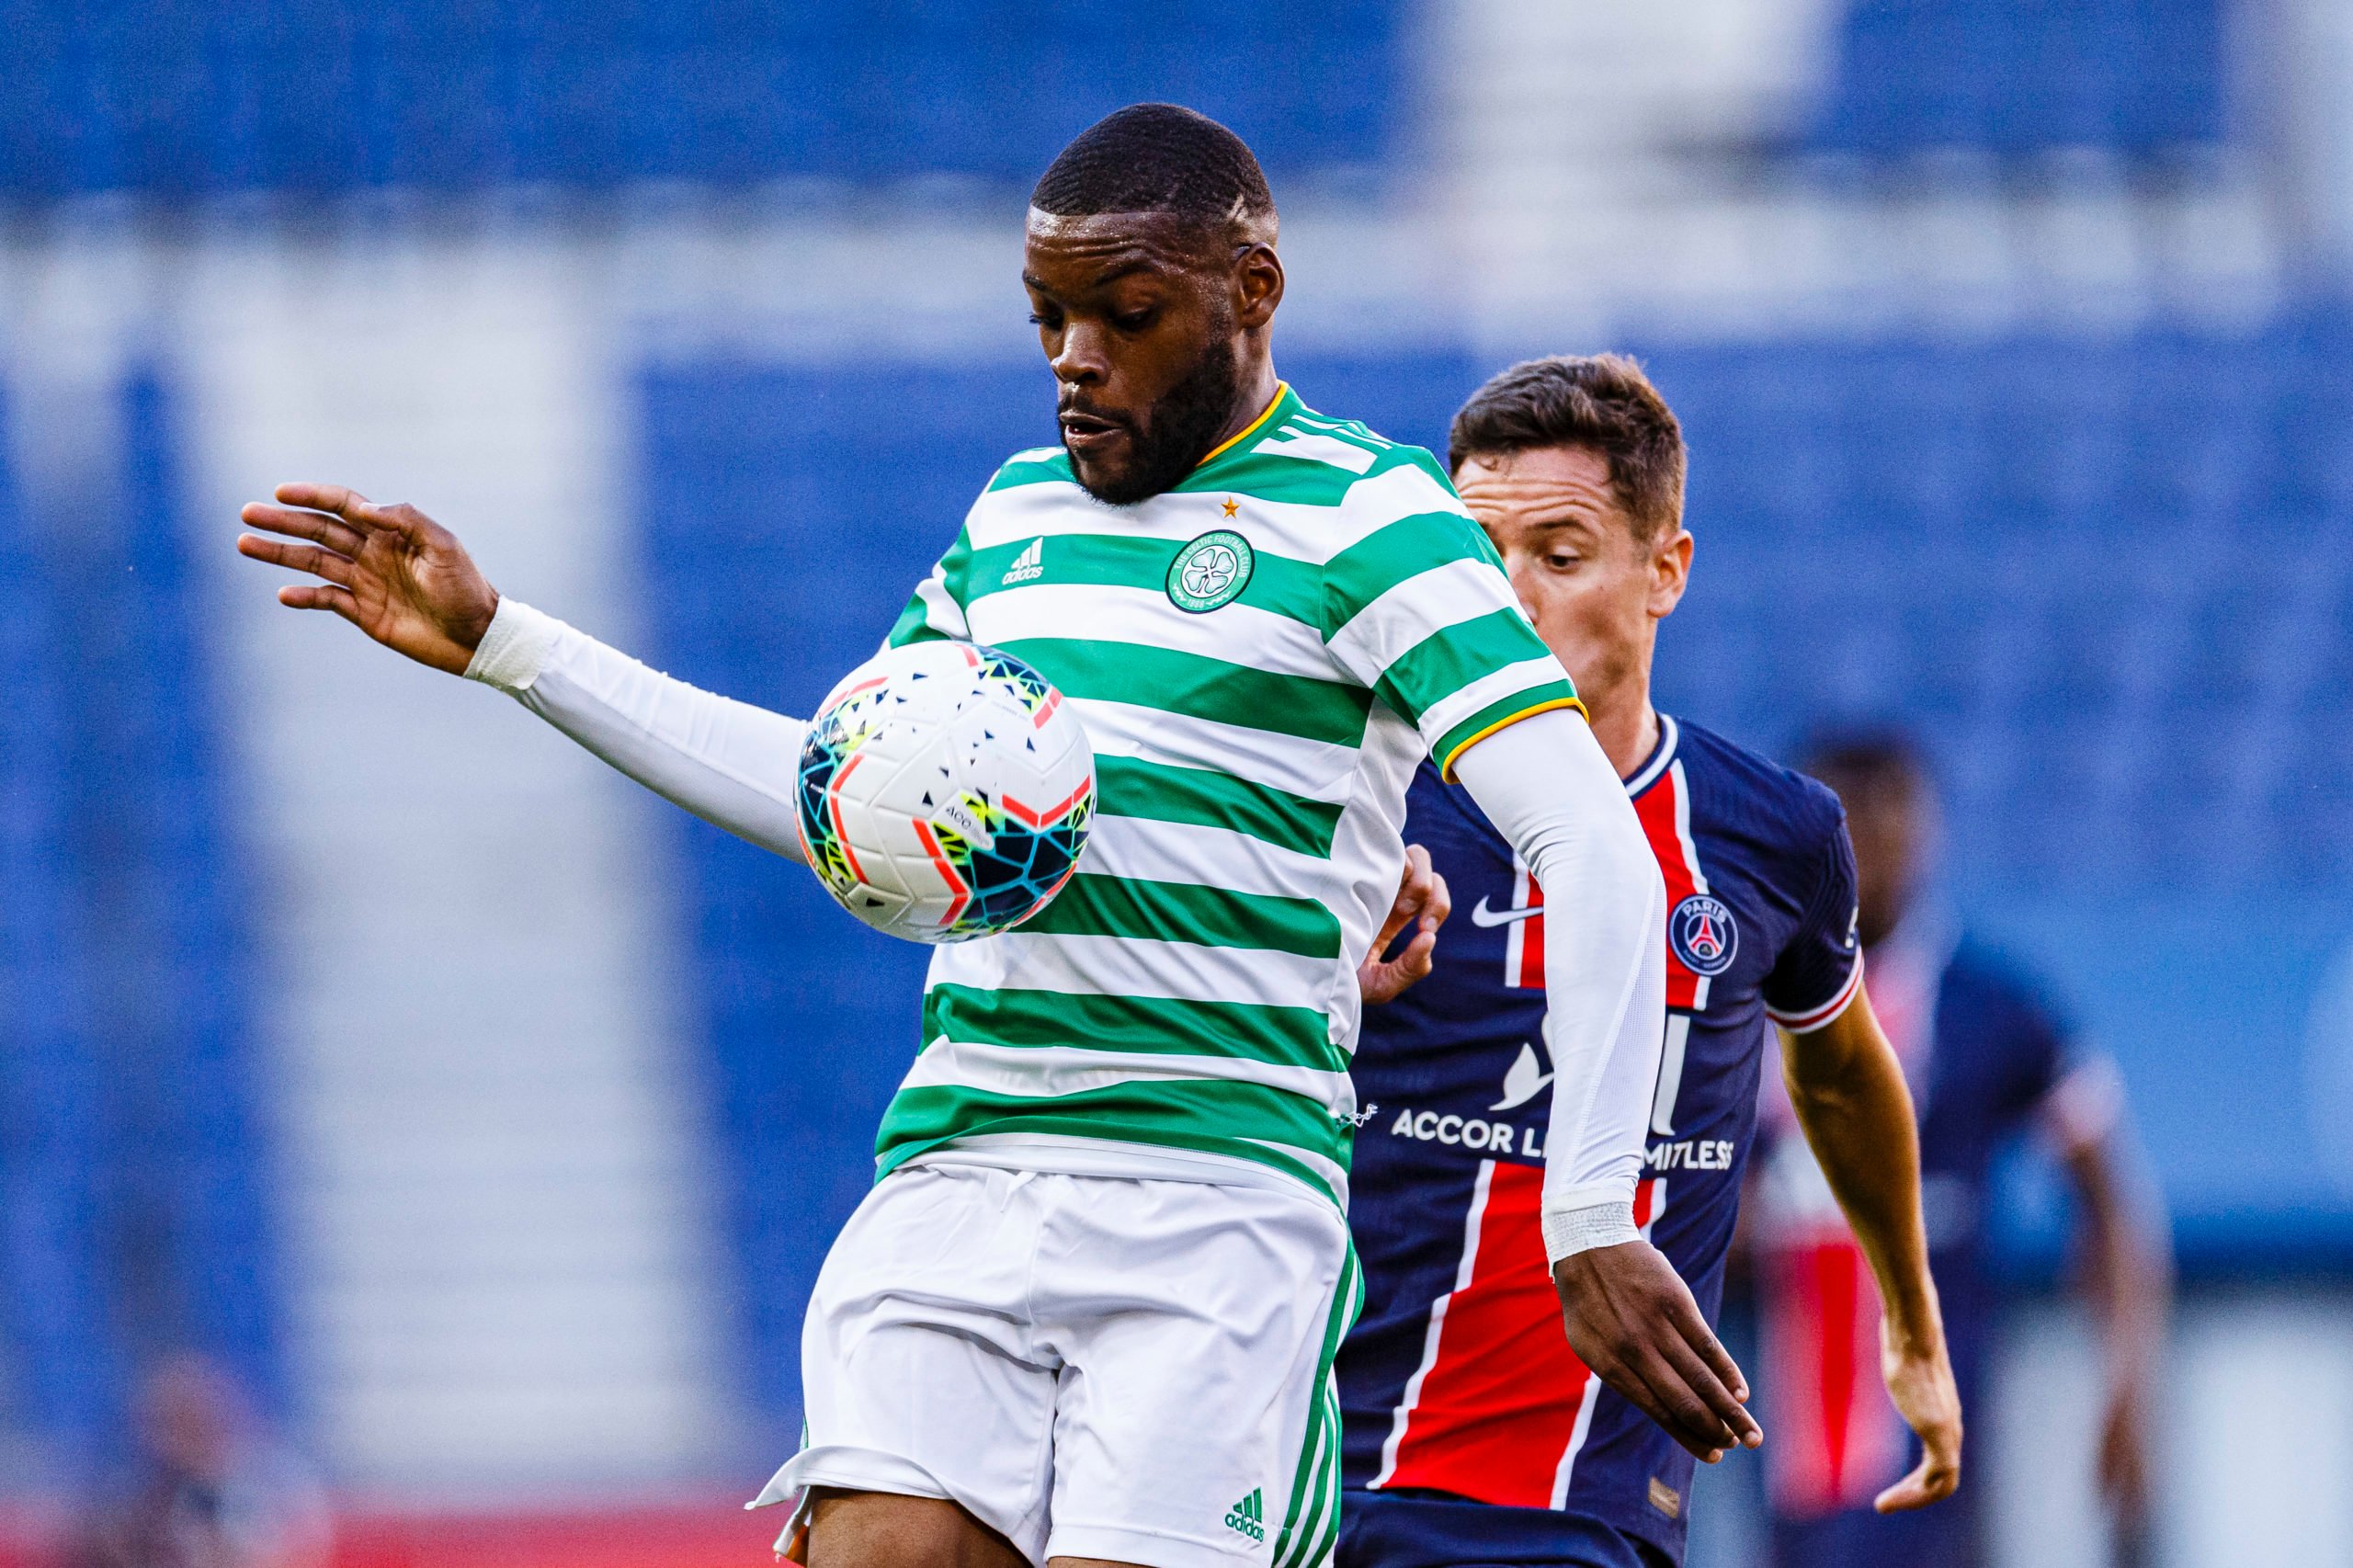 Celtic exile Ntcham: "I can't say no to Marseille to stay in Scotland"